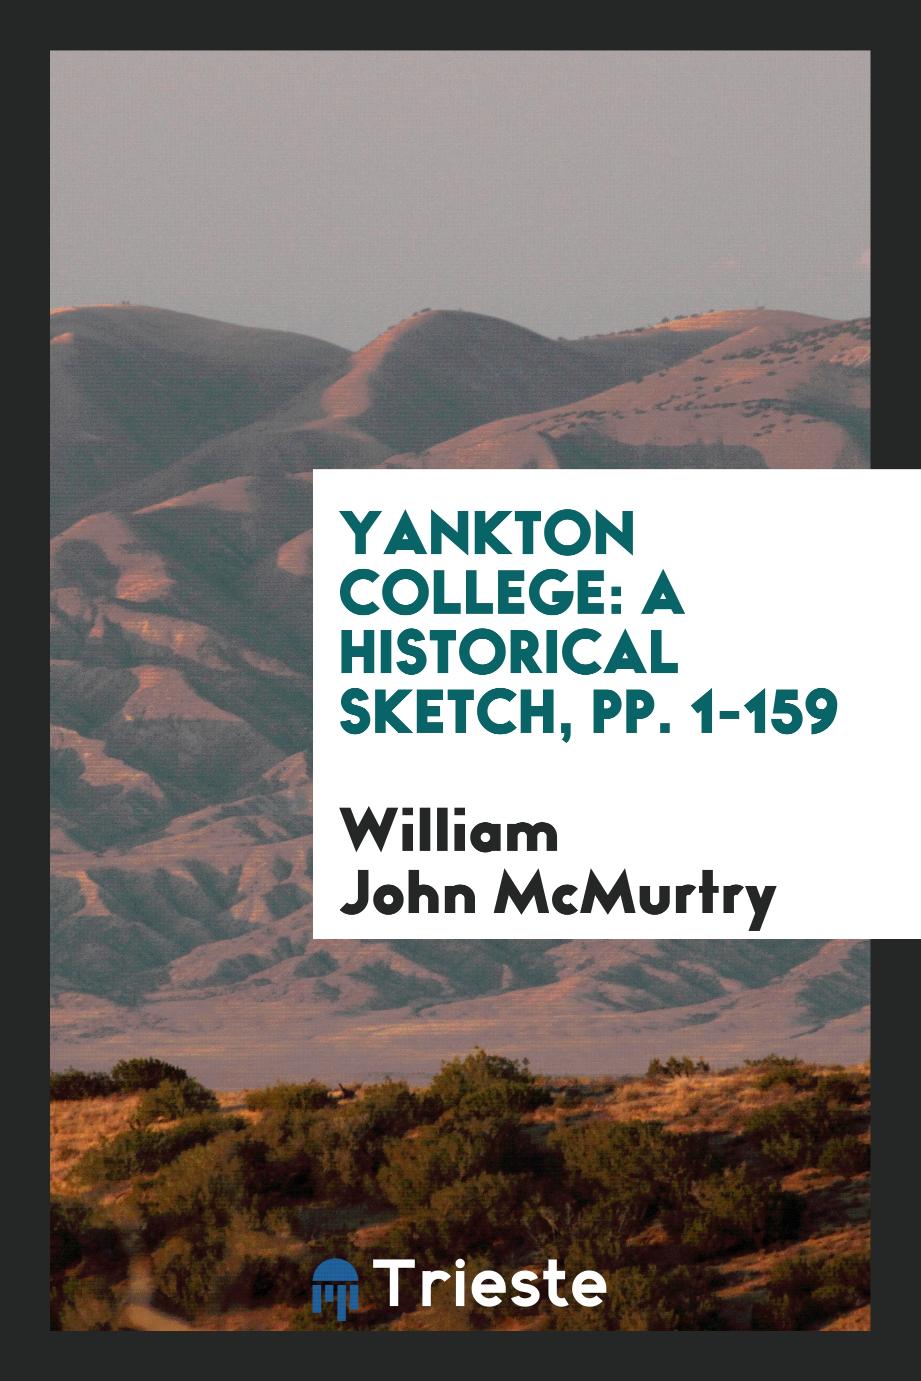 Yankton College: A Historical Sketch, pp. 1-159